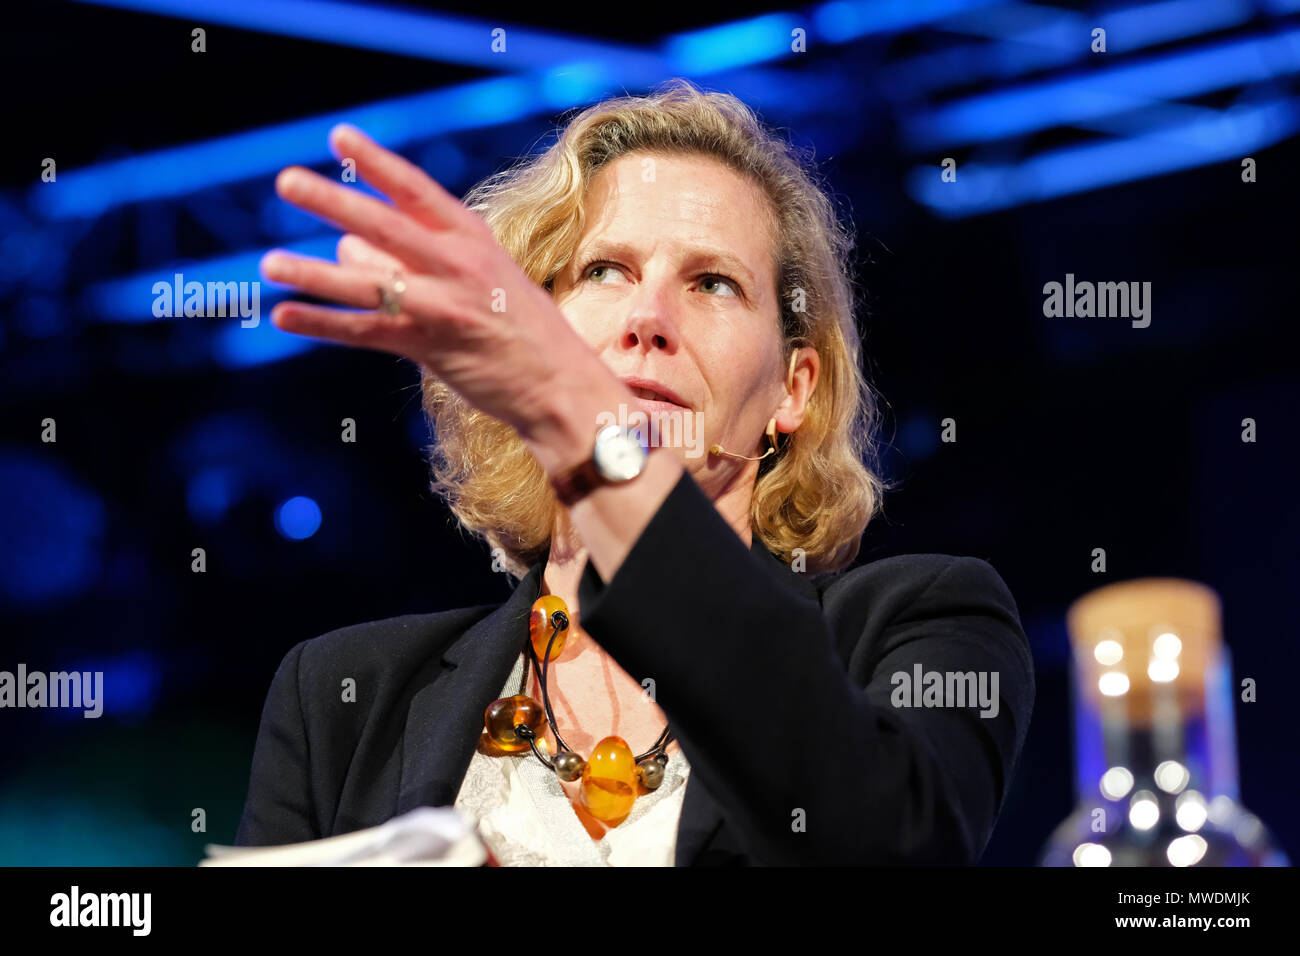 Hay Festival, Hay on Wye, UK - Friday 1st June 2018 - Laura Spinney science journalist and author on stage talking about her book Pale Rider - The Spanish Flu of 1918 and how it Changed the World  -  Photo Steven May / Alamy Live News Stock Photo